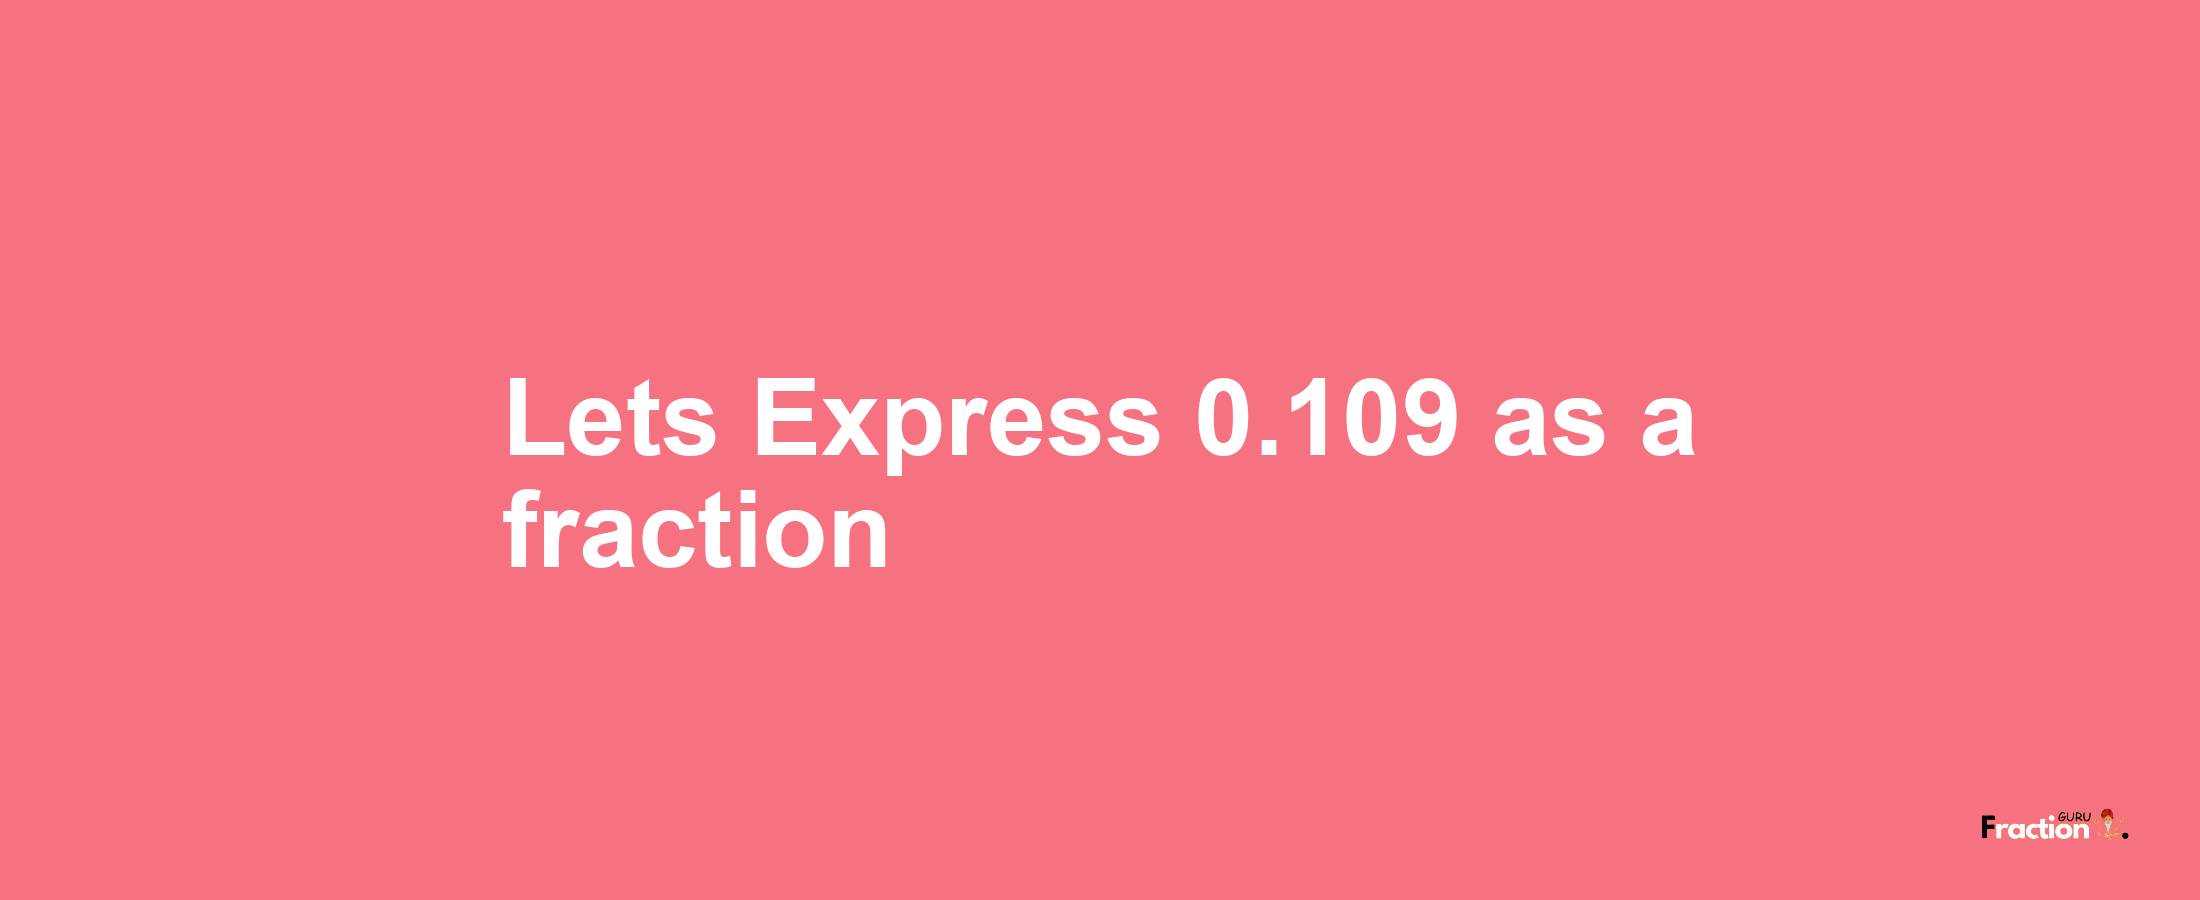 Lets Express 0.109 as afraction